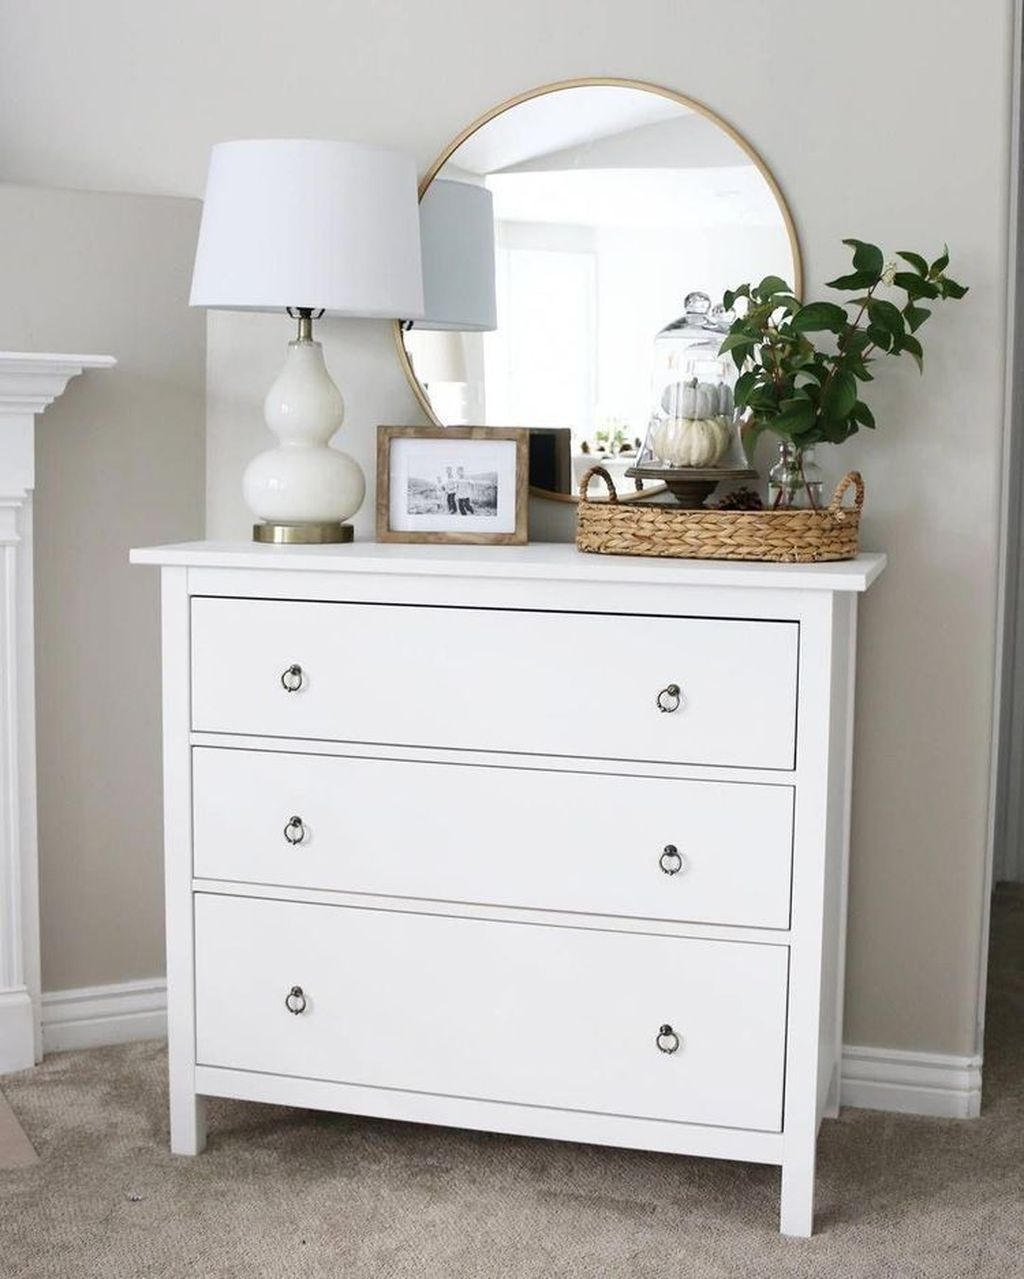 Stylish Bedroom Dressers Ideas With Mirrors That You Need To Try 33